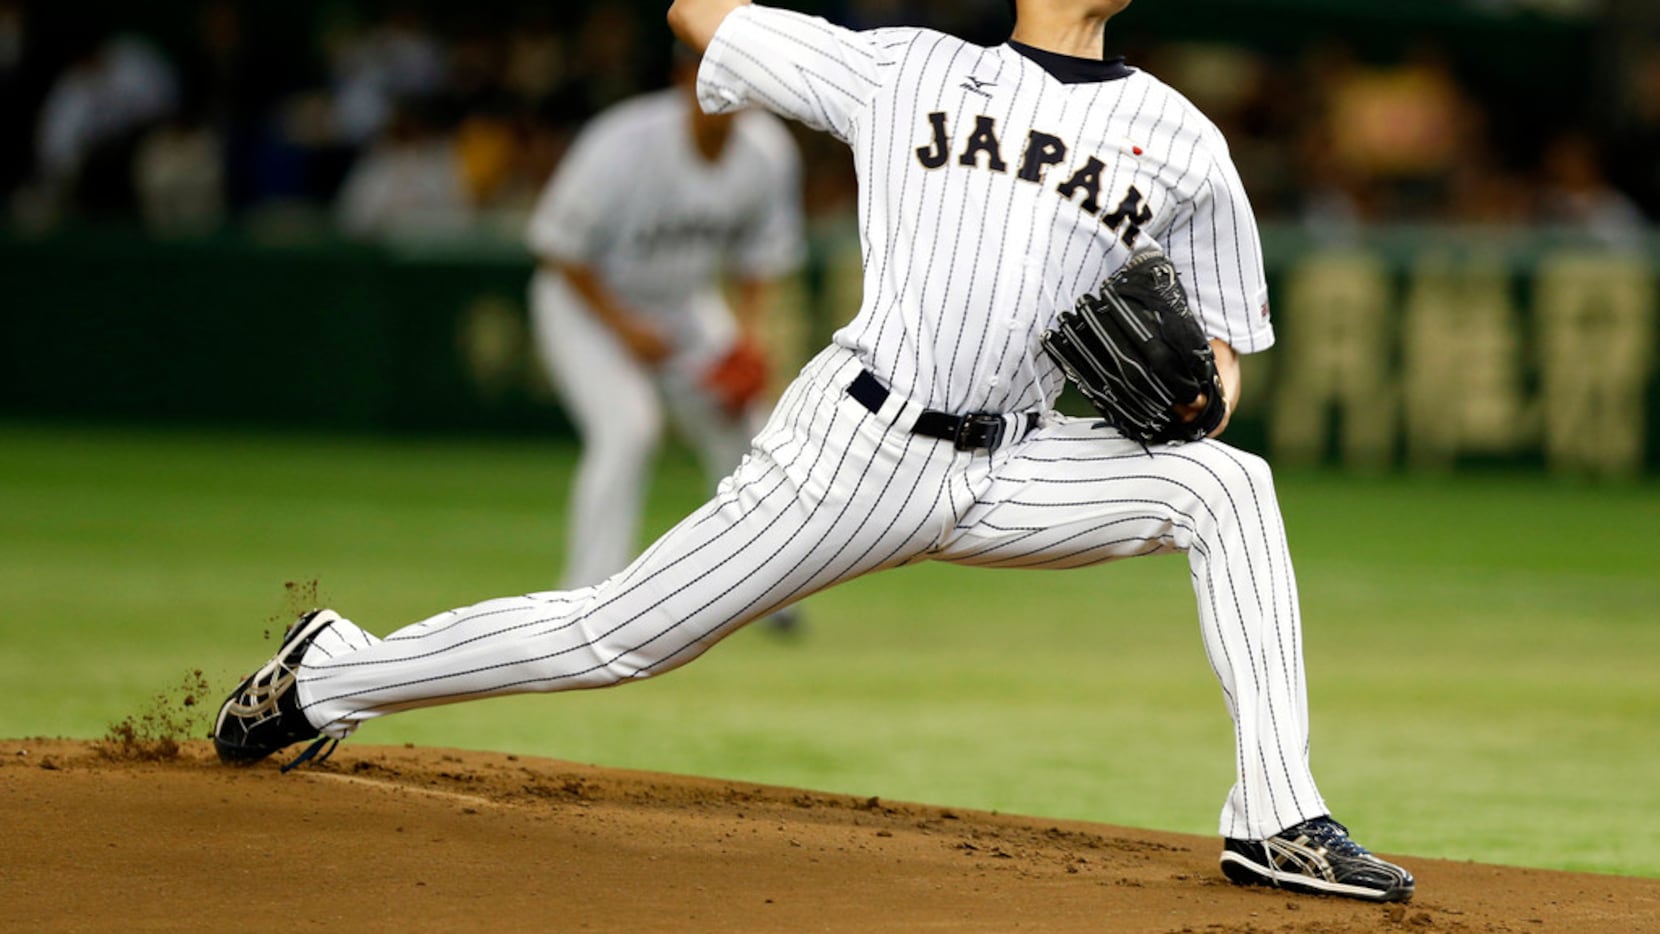 Rangers GM Jon Daniels on how Shohei Otani compares to what Yu Darvish came  from